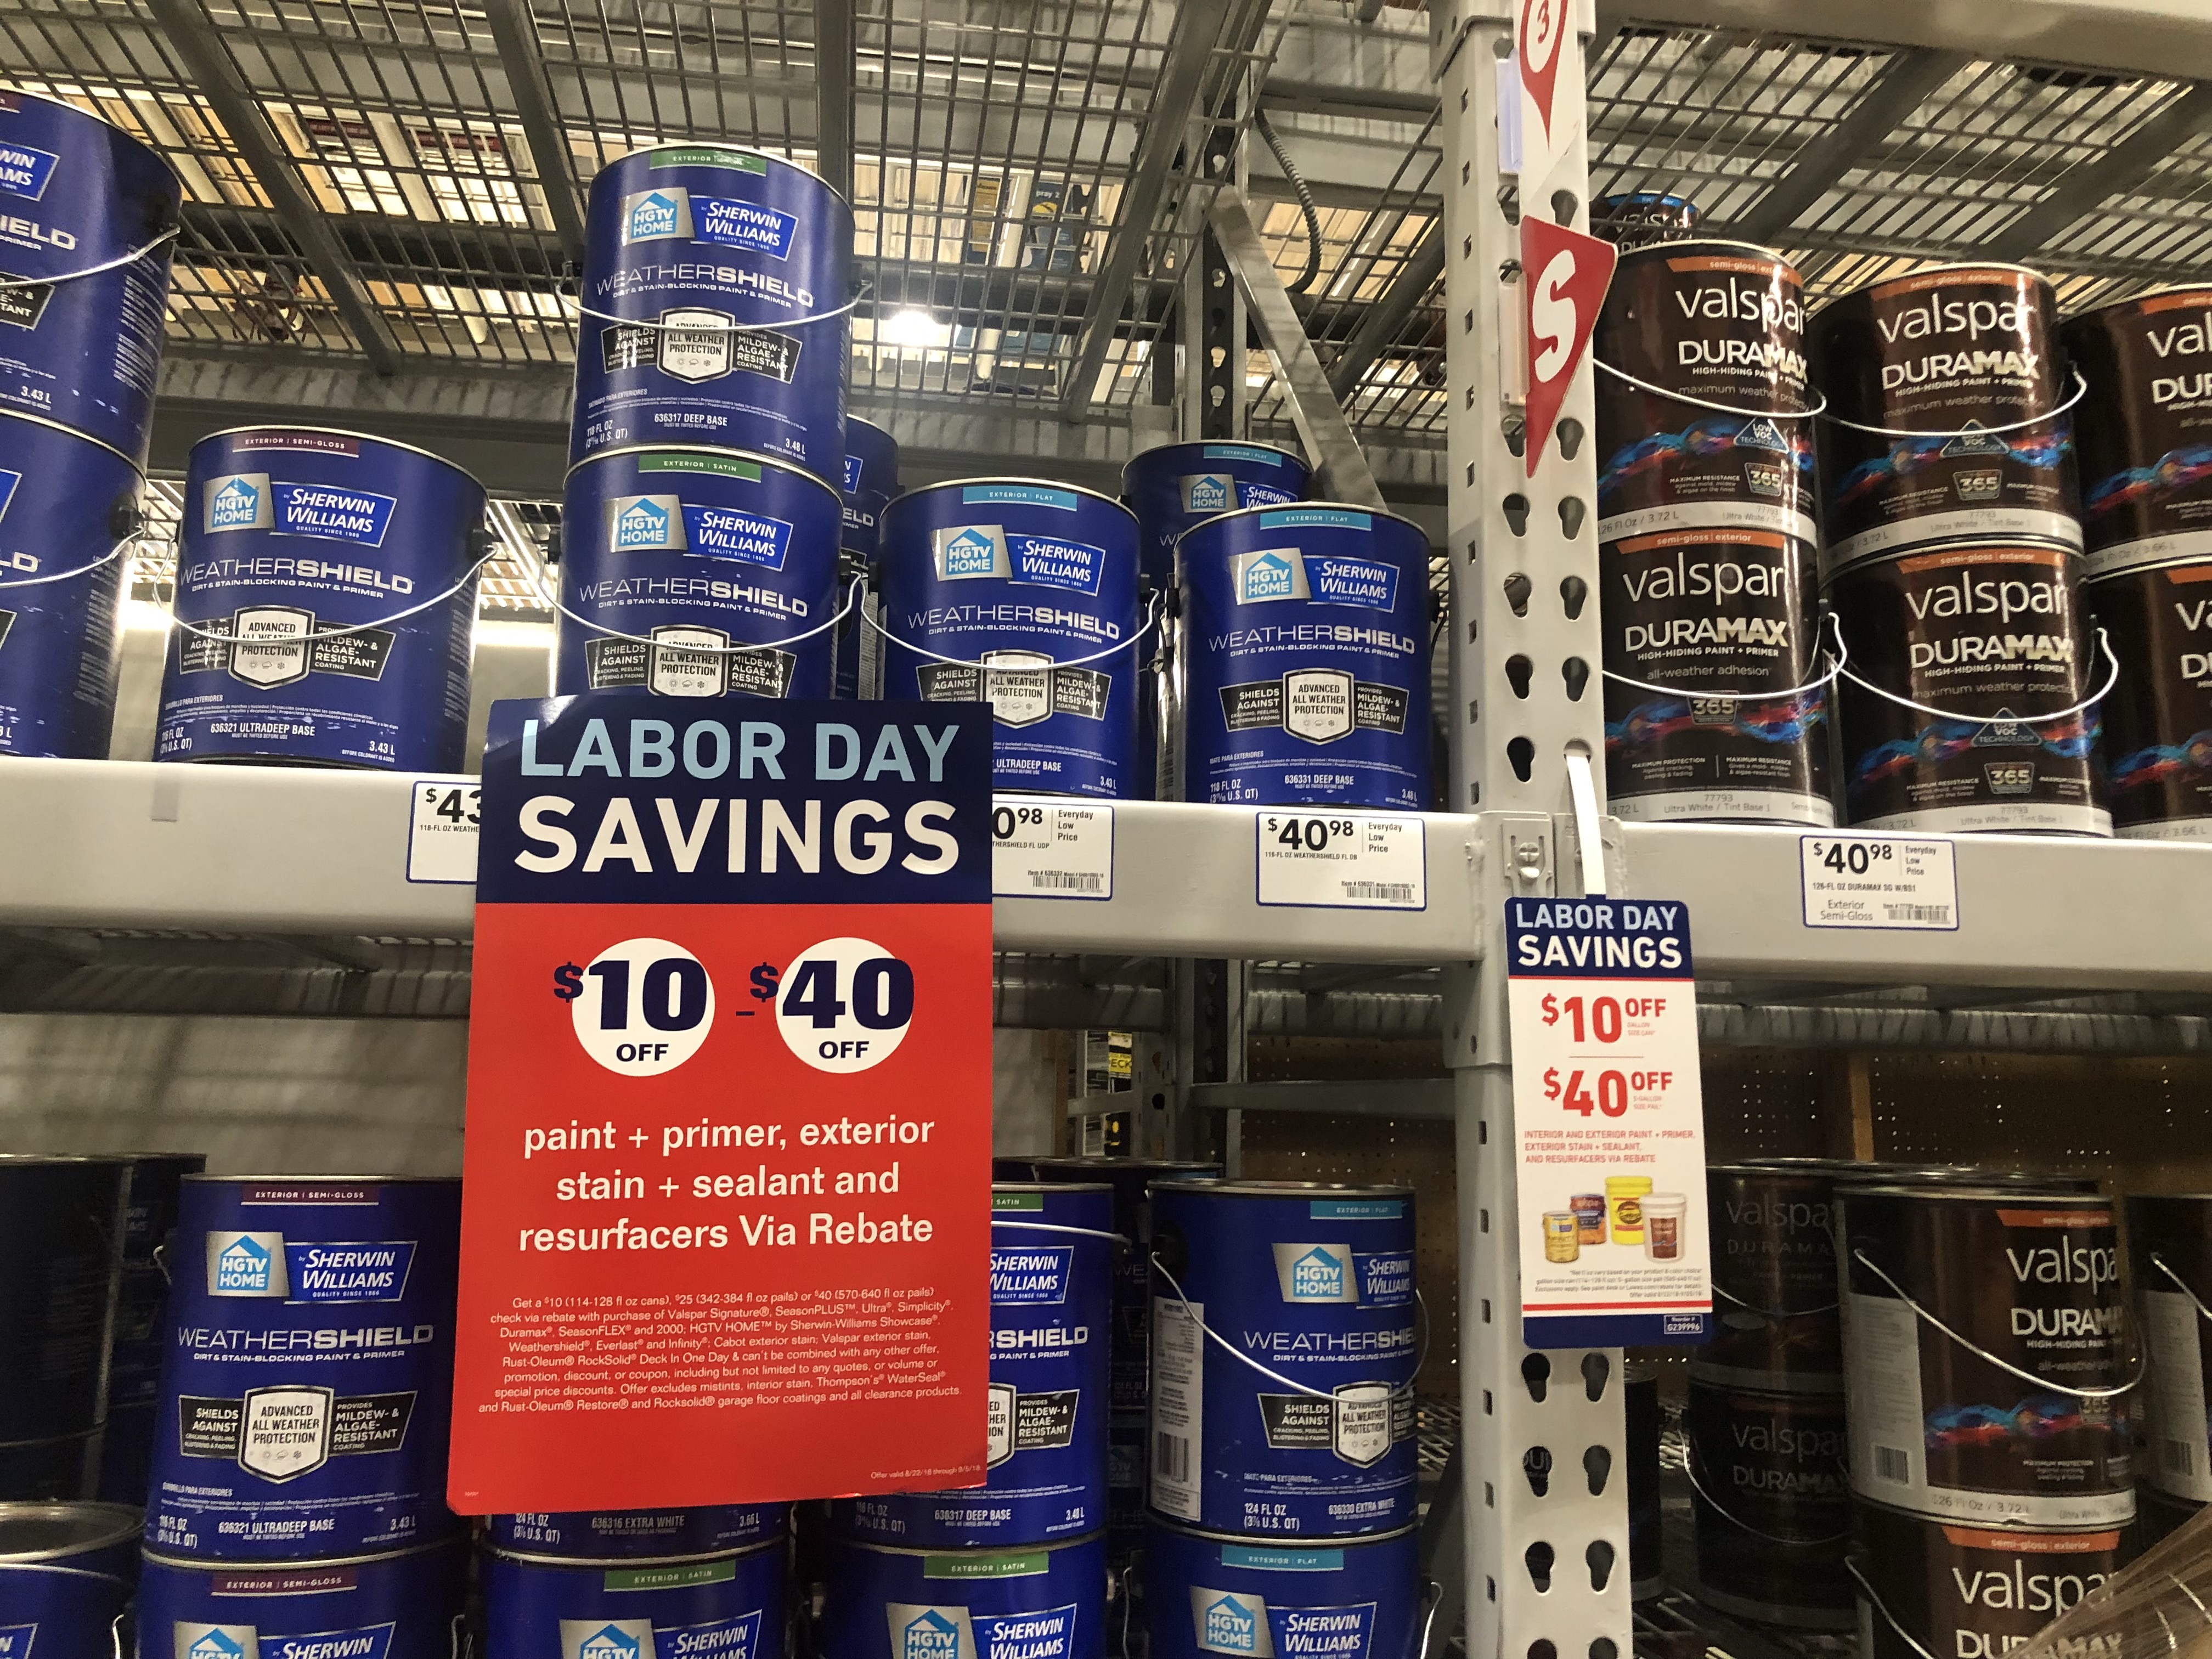 up-to-40-rebate-w-select-paint-stain-purchase-at-lowe-s-in-store